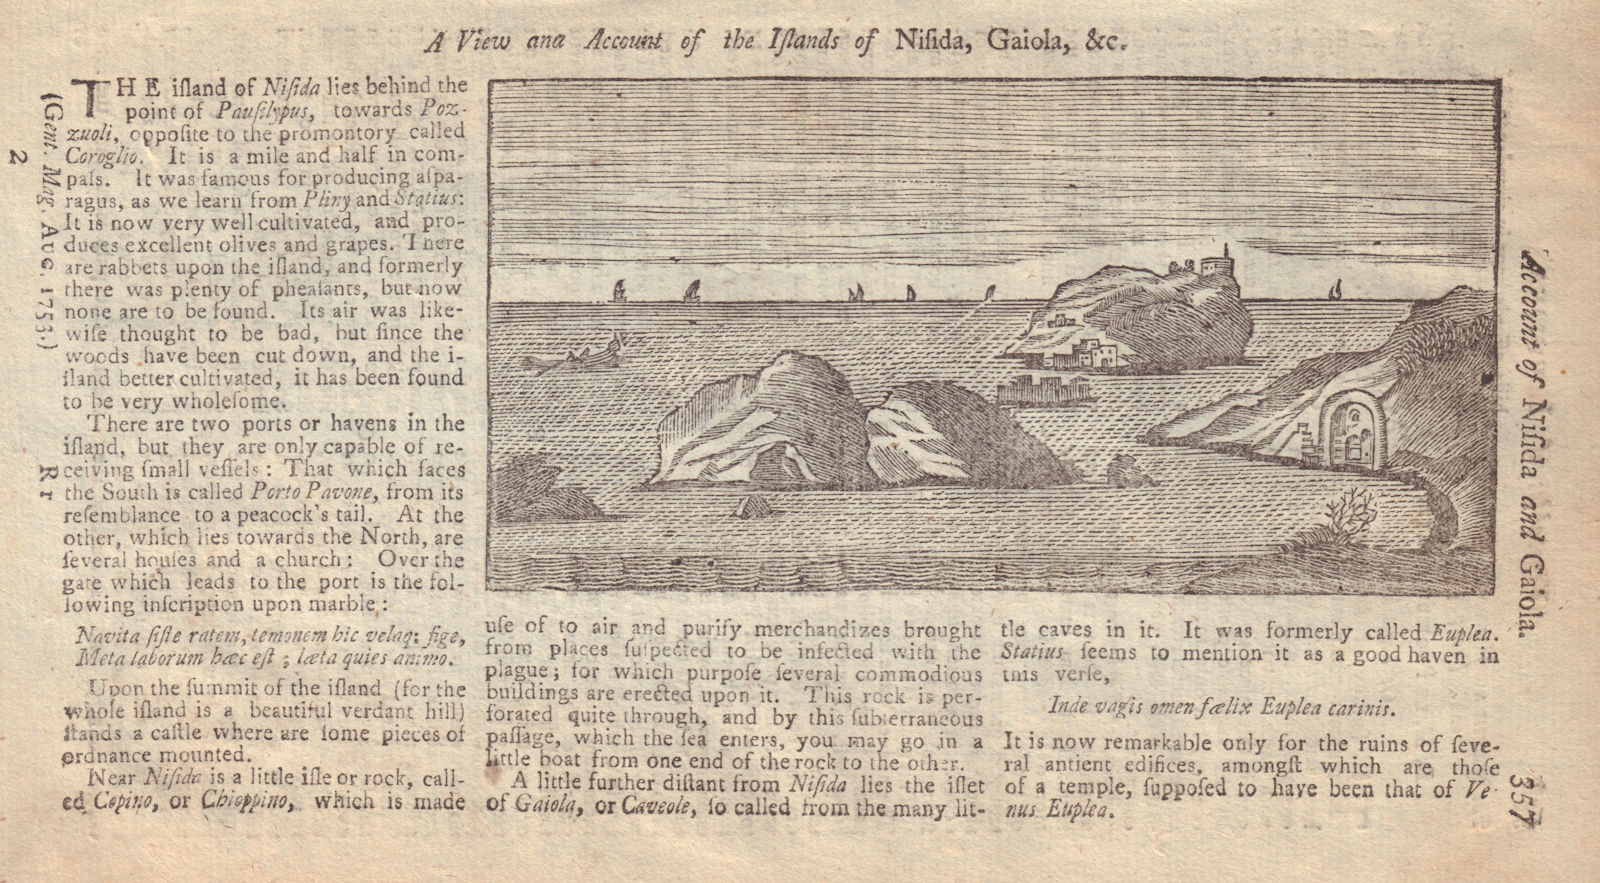 A View and Account of the Islands of Nisida & Gaiola near Naples, Italy 1753